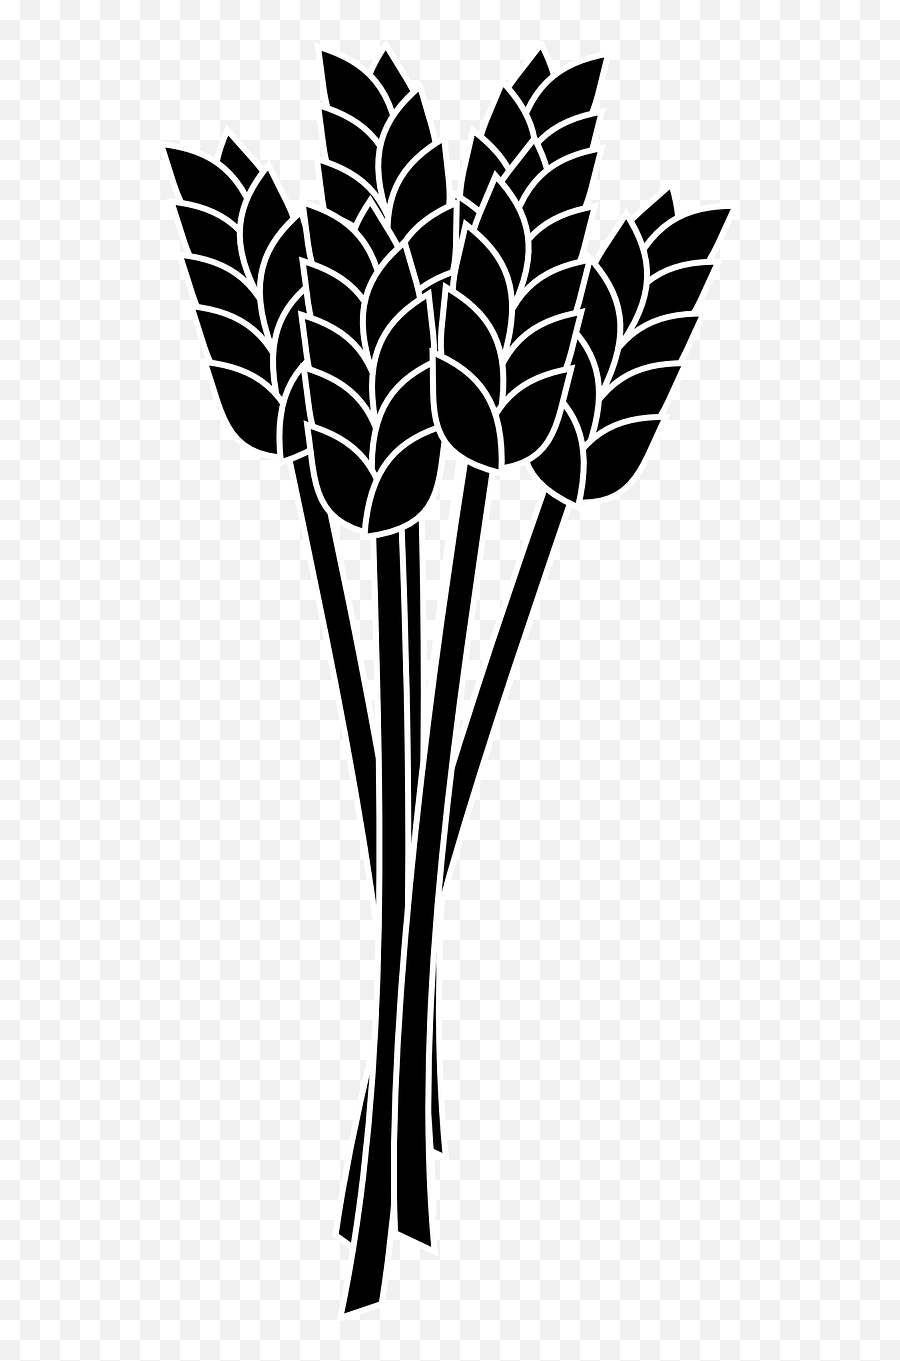 Wheat Spike Bunch Grain - Wheat Clipart Black And White Transparent Background Png,Spike Png